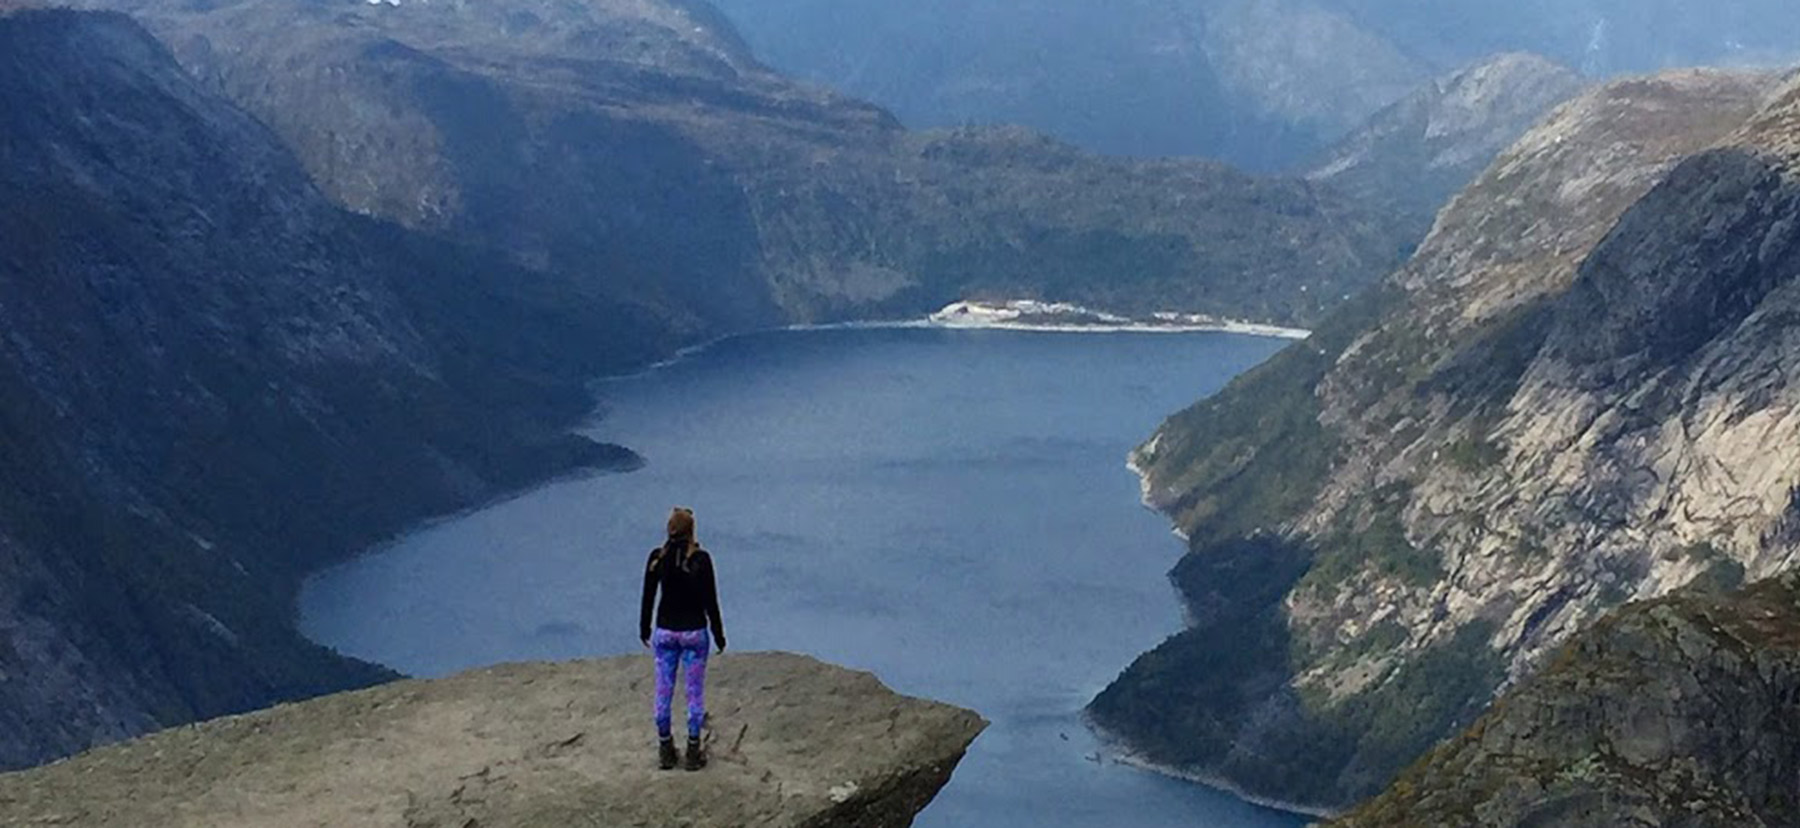 Jessie Lamworth stands on an outcropping overlooking the Hardanger Fjord